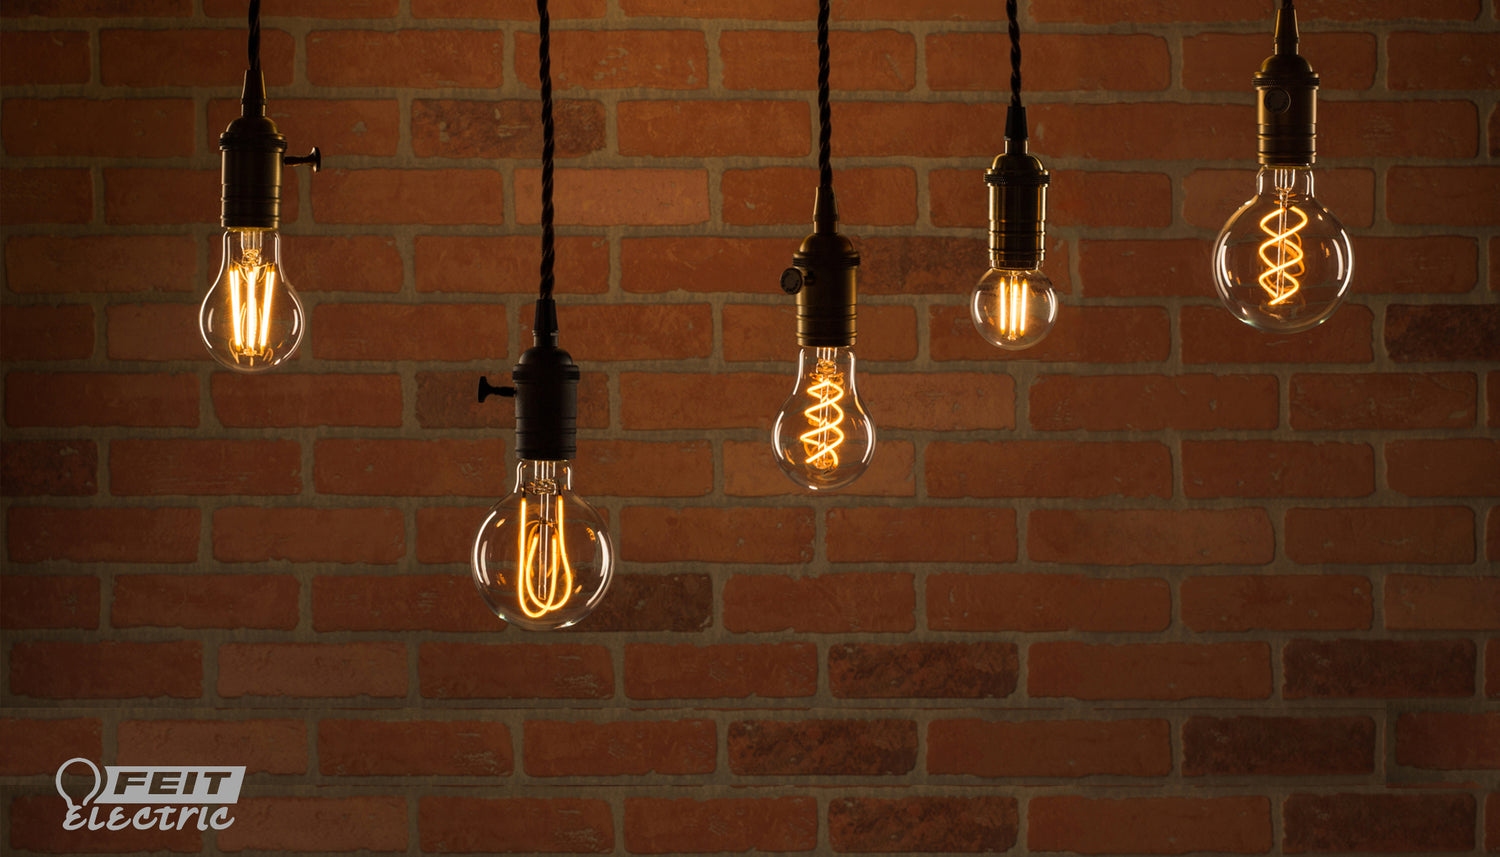 Feit Electric Introduces Vintage Style LED Lighting with a Twist